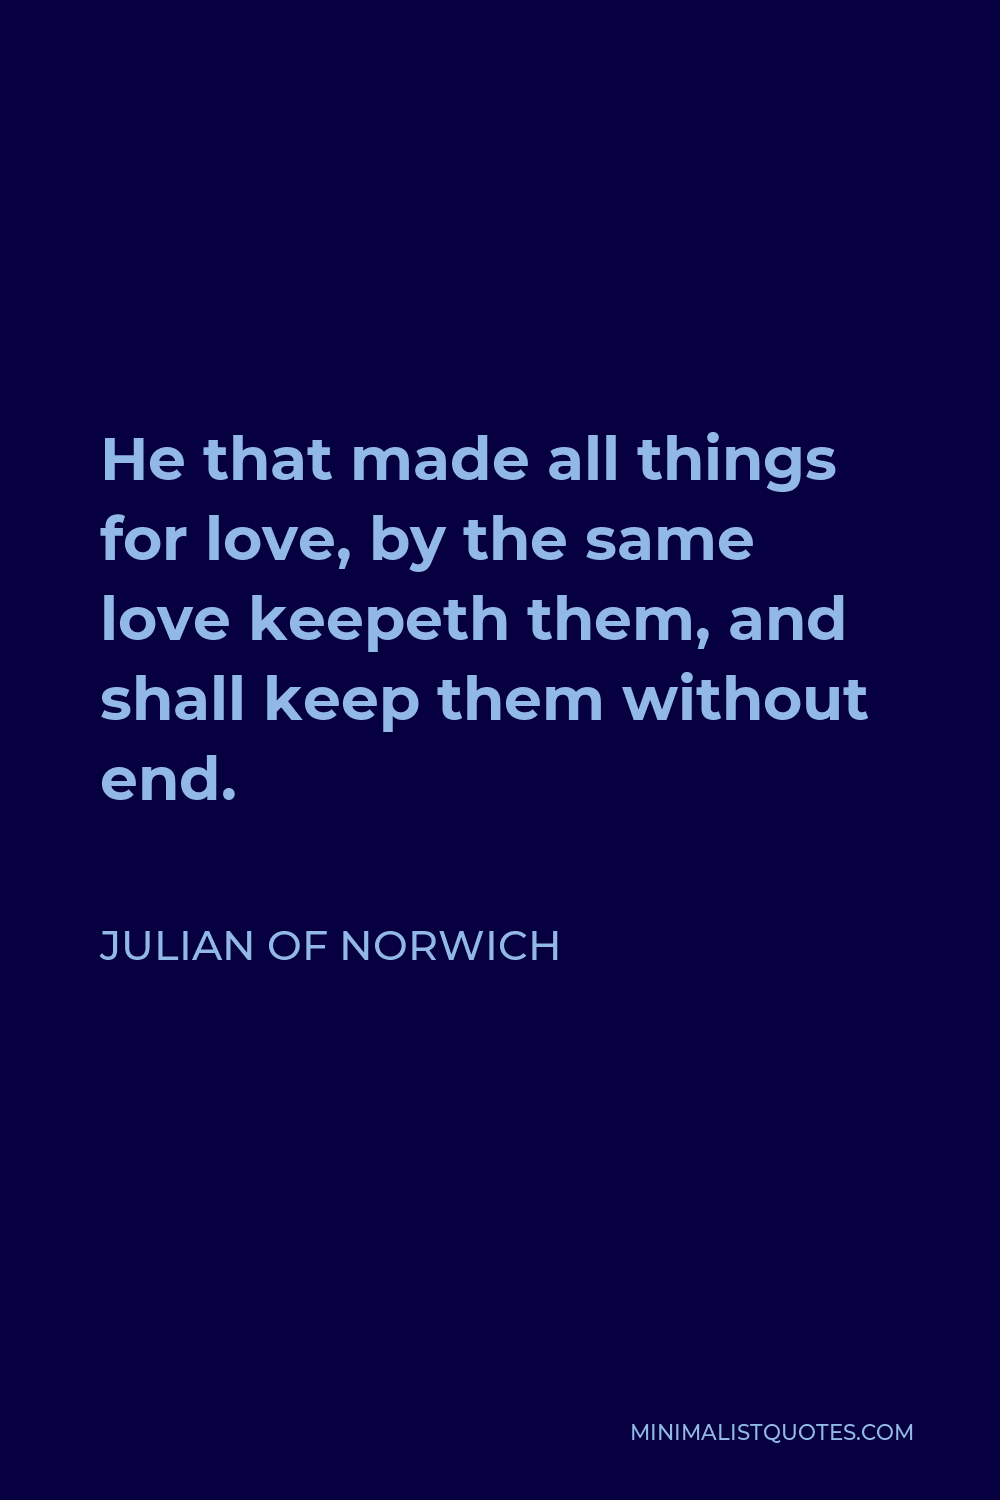 Julian of Norwich Quote - He that made all things for love, by the same love keepeth them, and shall keep them without end.